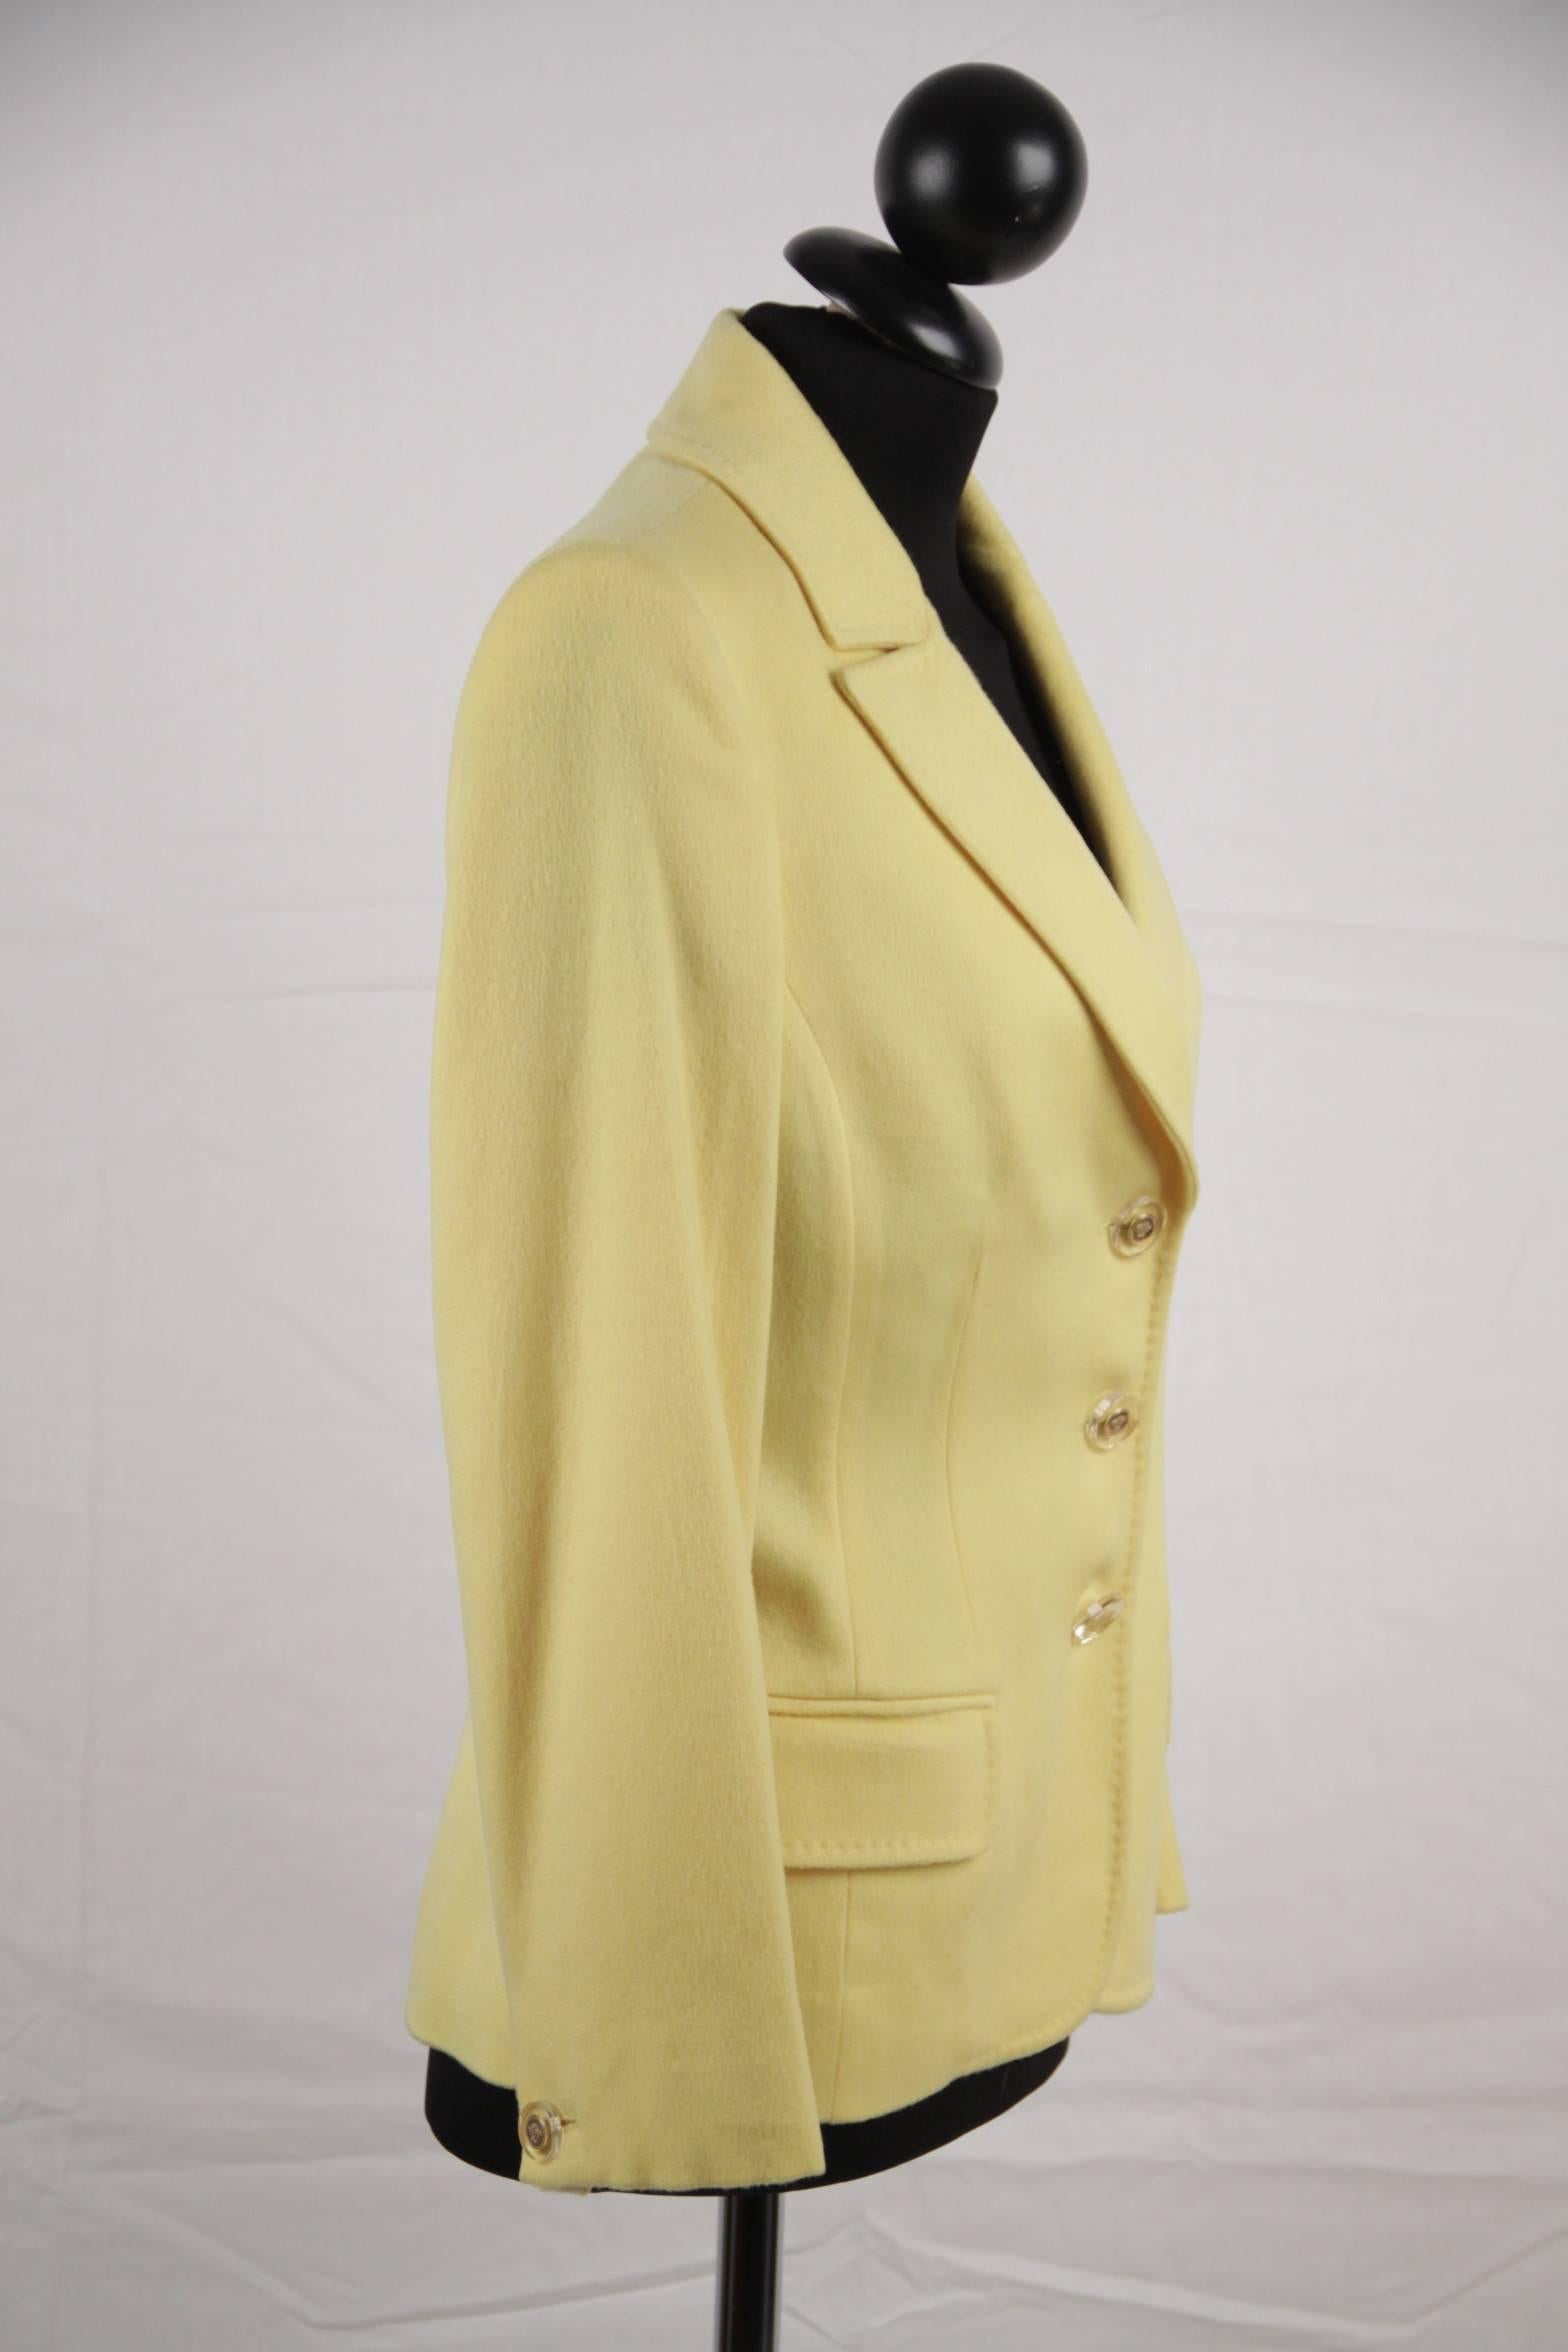 
- Bright yellow cashmere blazer t from the 2005 Fall Ready-to-wear collection by VERSACE
- Lapel collar
- Seam details throughout
- Dual flap pockets at waist
- Button closure on the front (MEDUSA buttons)
- 100% silk lining with colorful